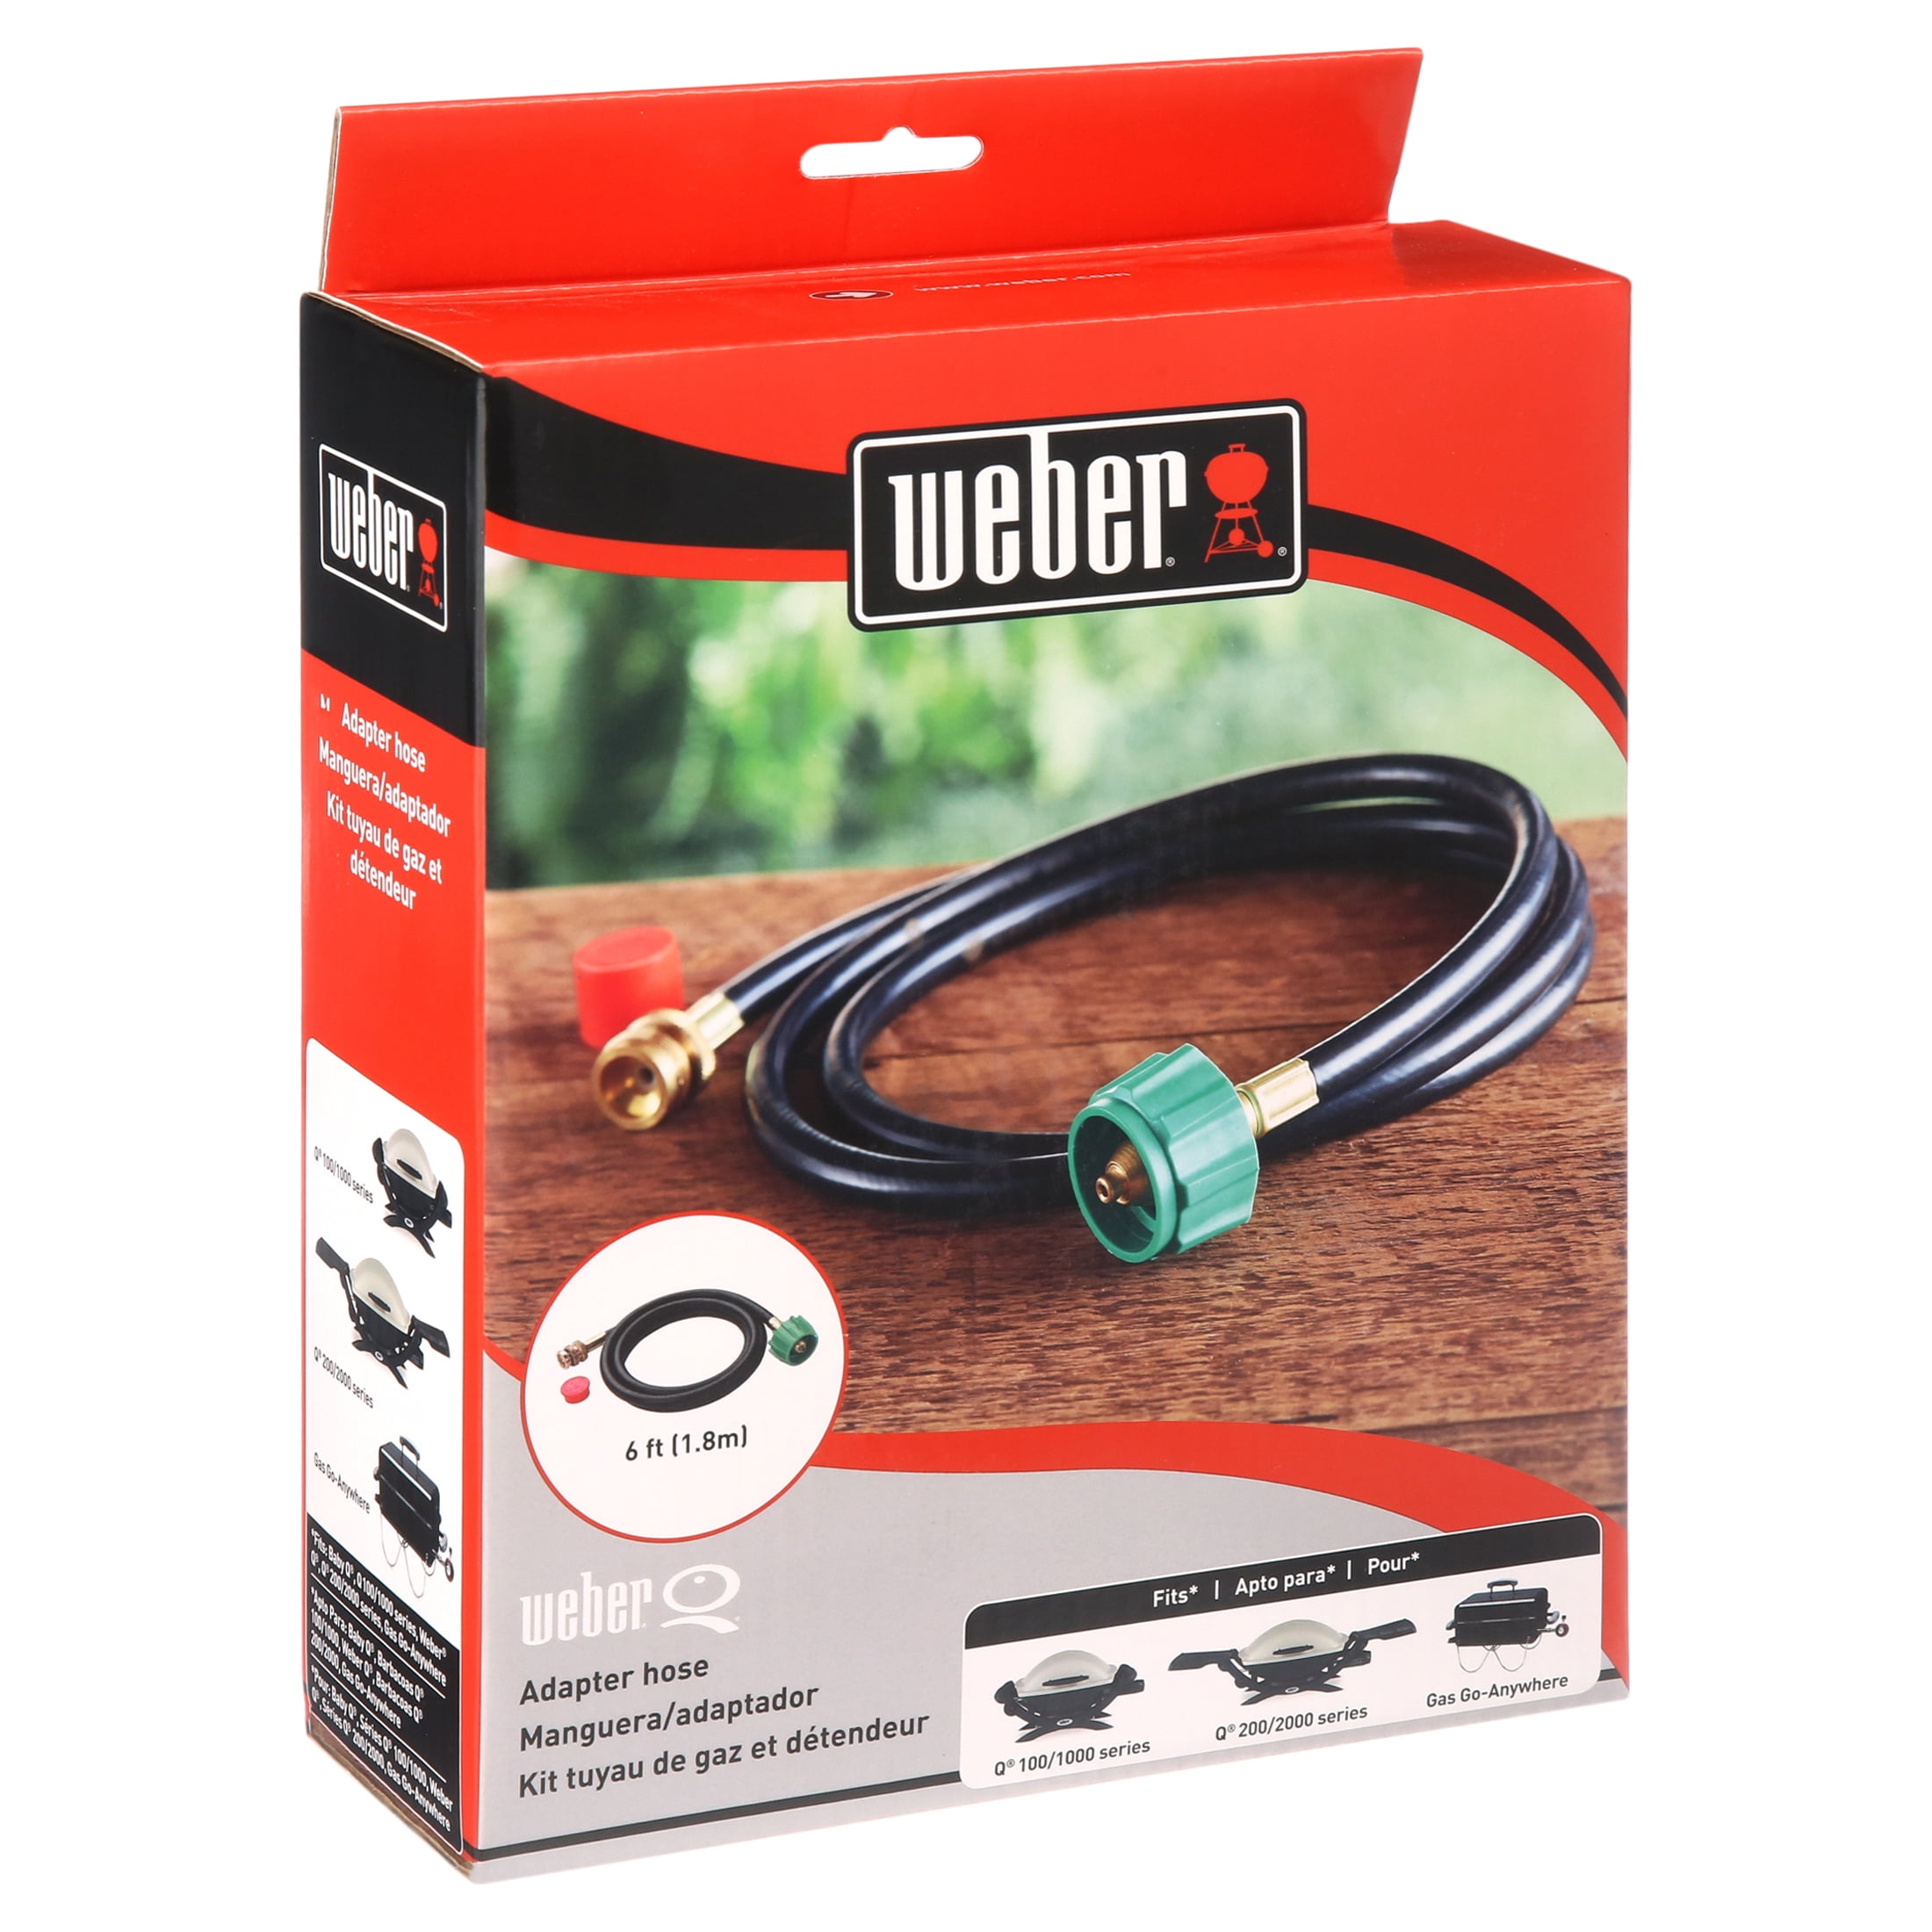 onlyfire 6-feet Adapter Hose Connection Kit Replacement Parts for Weber Q-Series and Gas Go-Anywhere Grills 